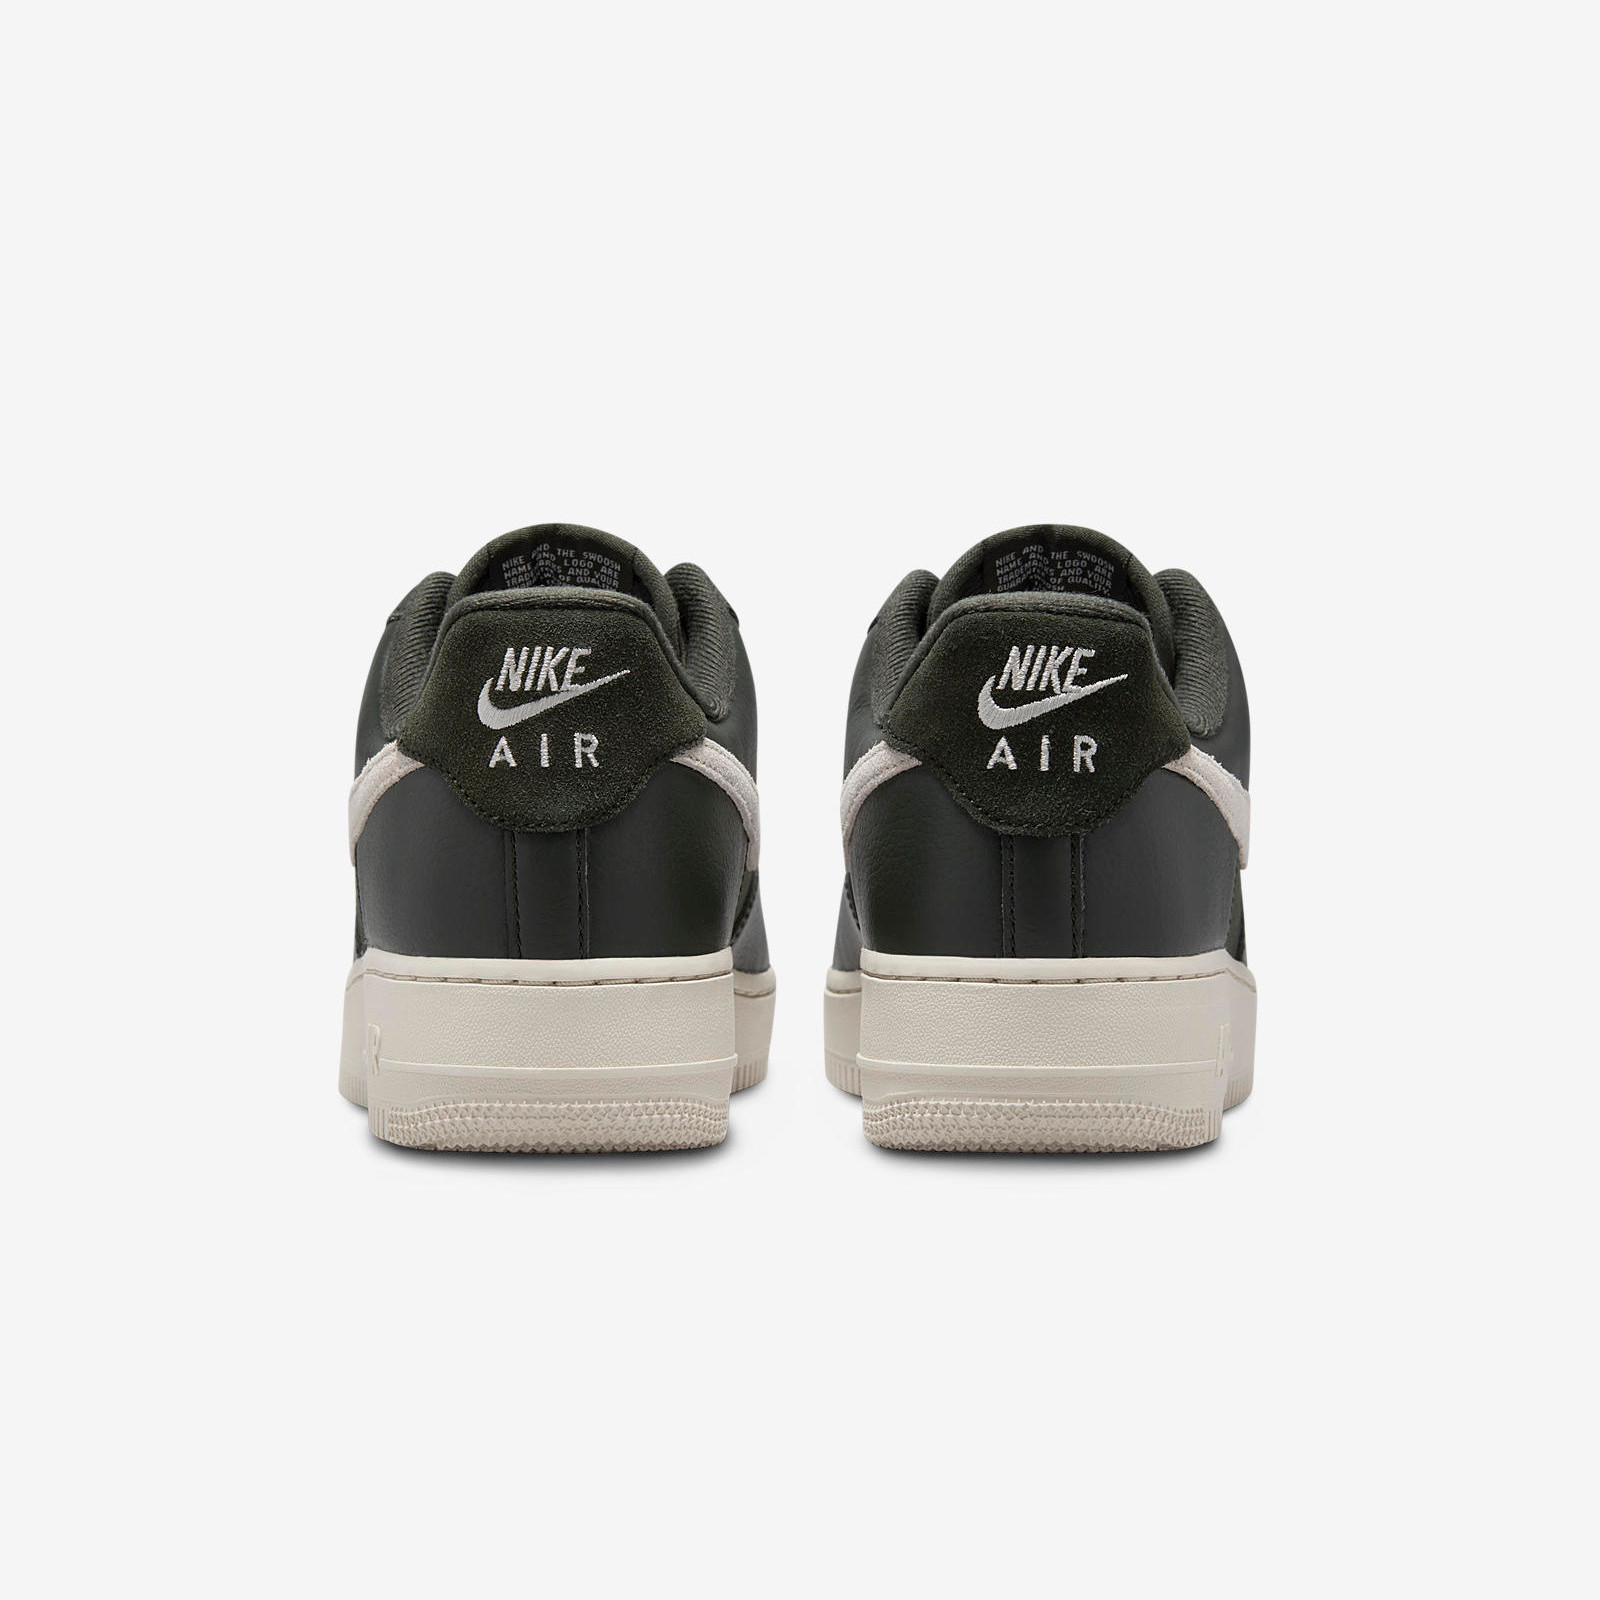 Nike Air Force 1 Low
« Sequoia »